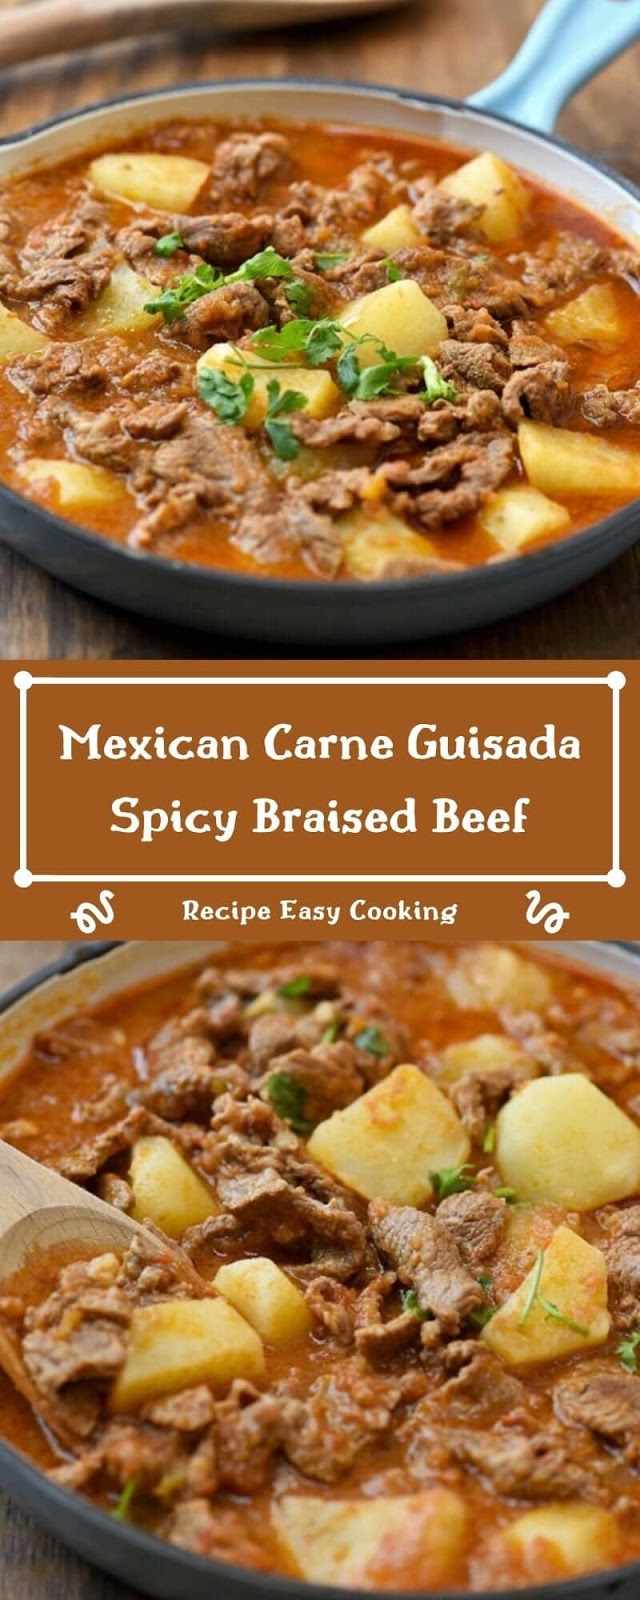 Mexican Carne Guisada Spicy Braised Beef